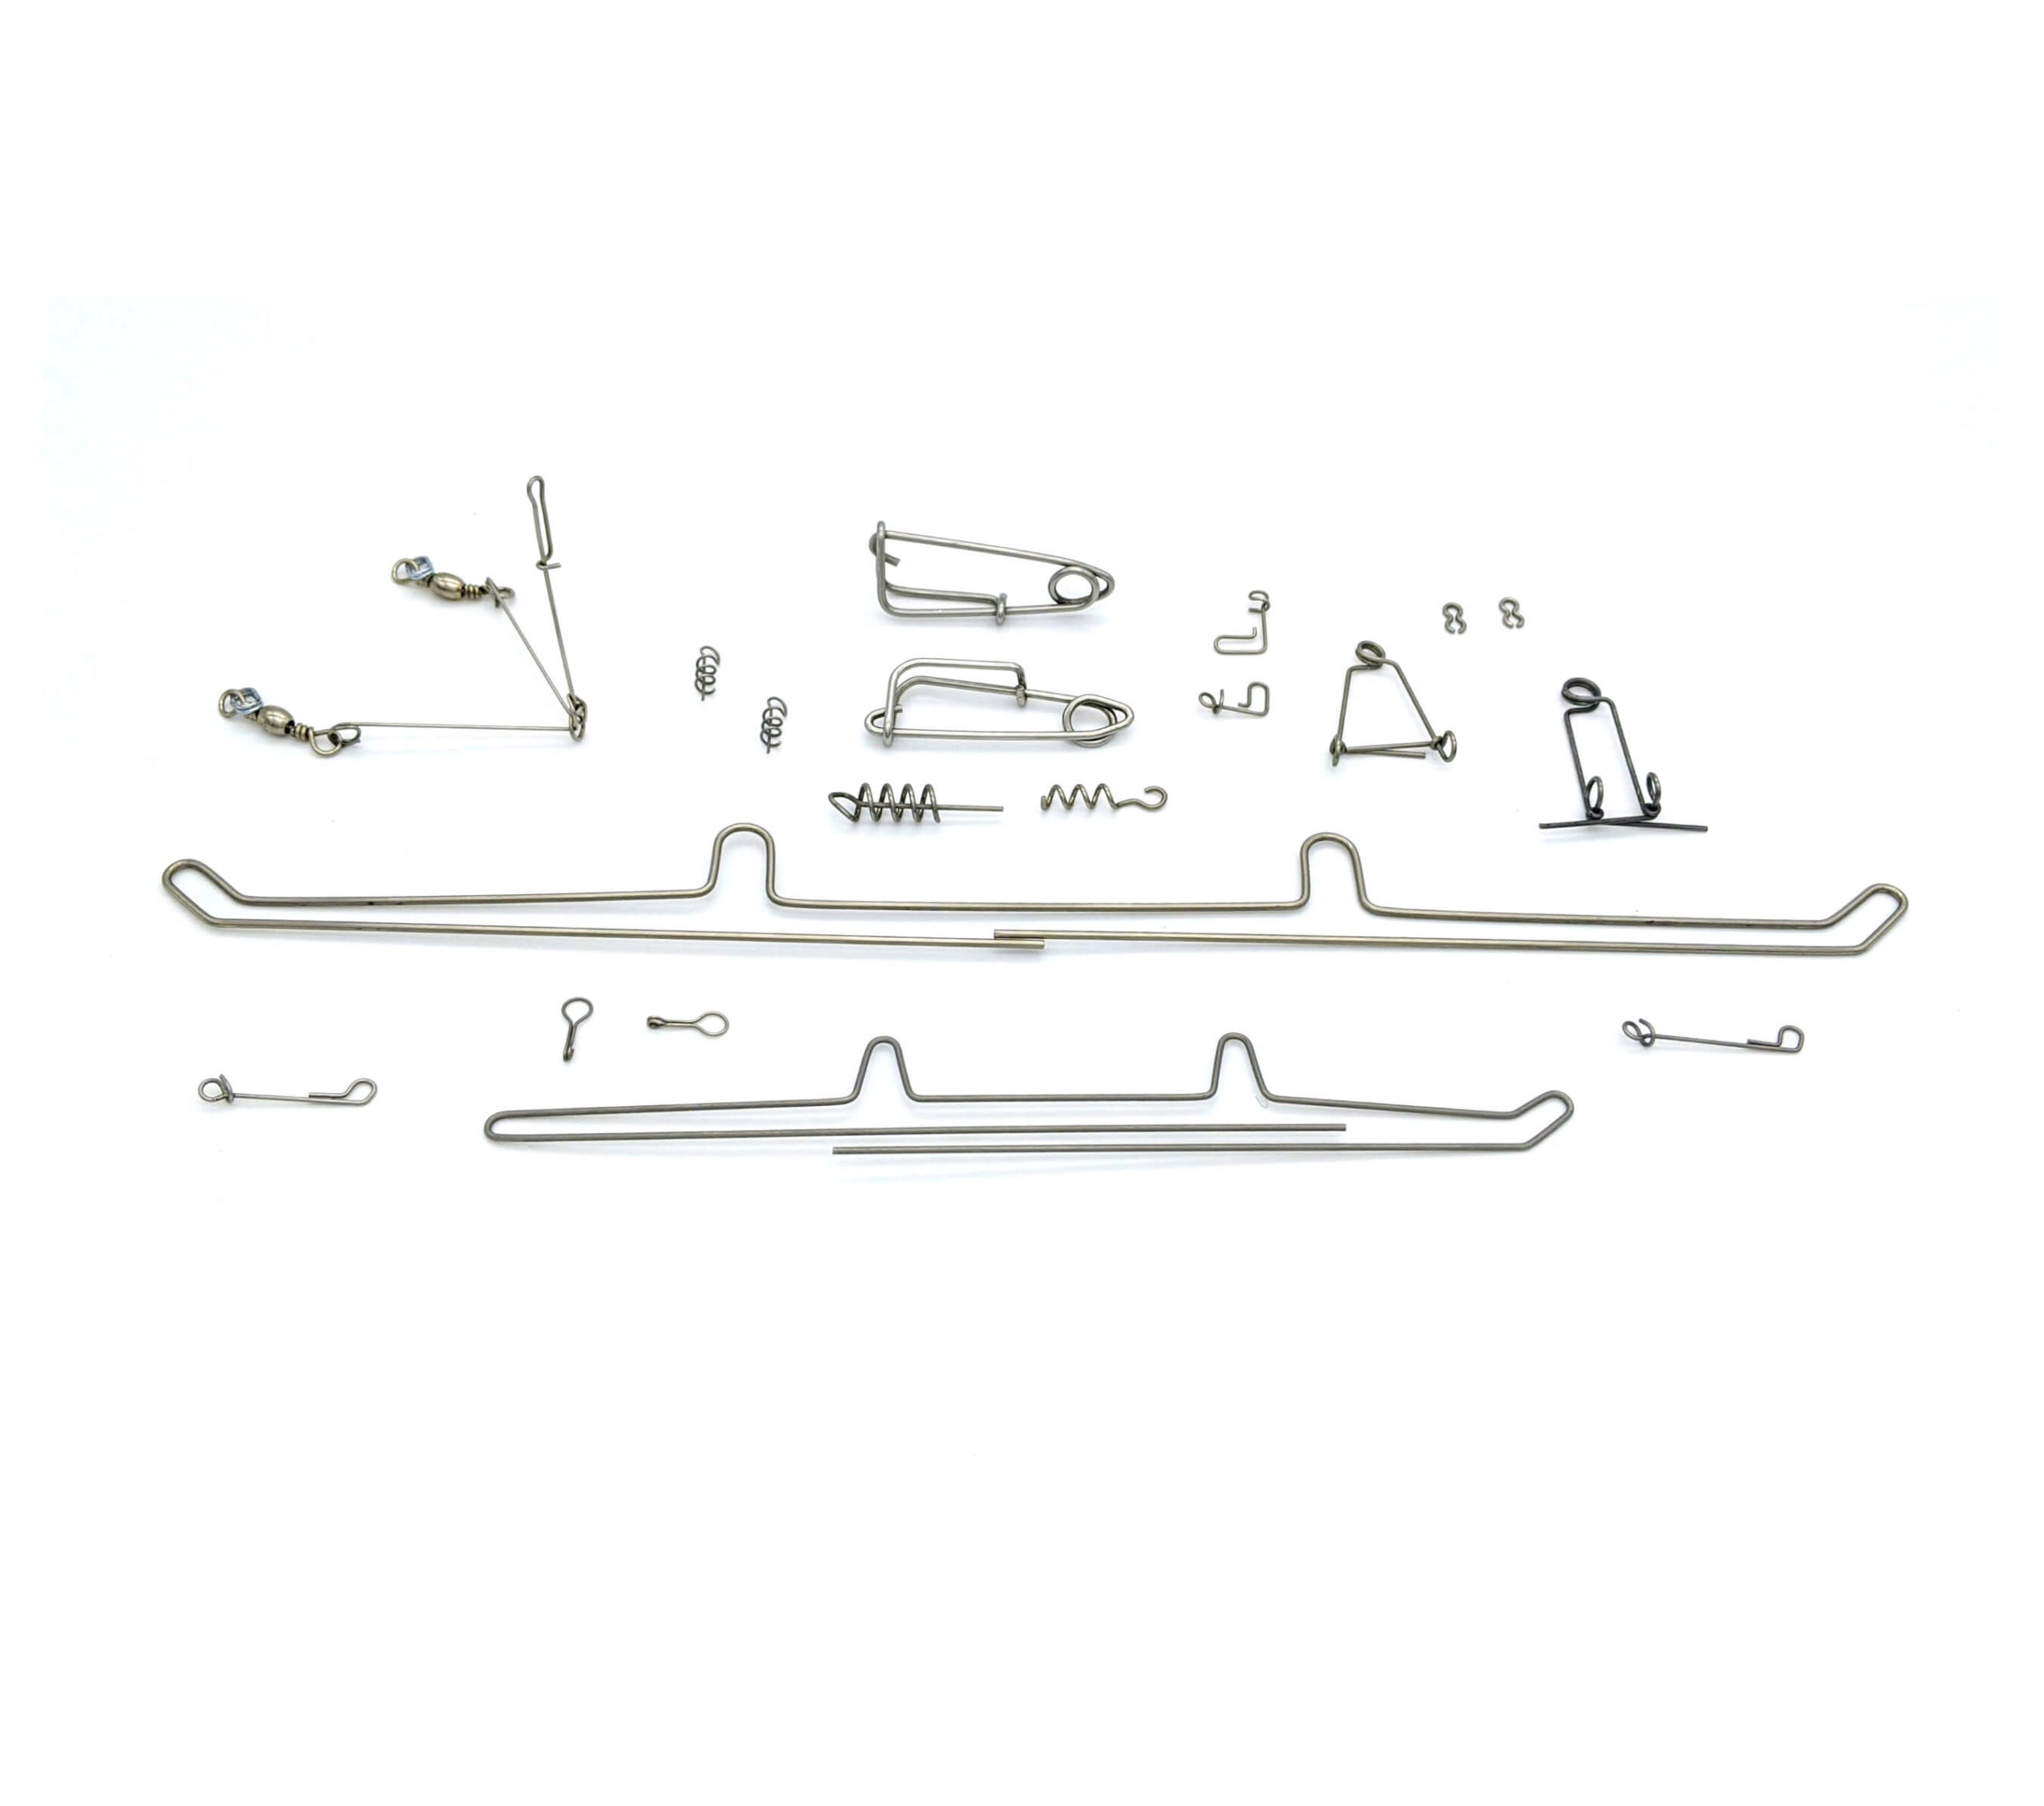 https://www.masterspring.com/wp-content/uploads/2021/03/Fishing-Tackle-Wire-Forms-Assortment-2-1-scaled.jpg